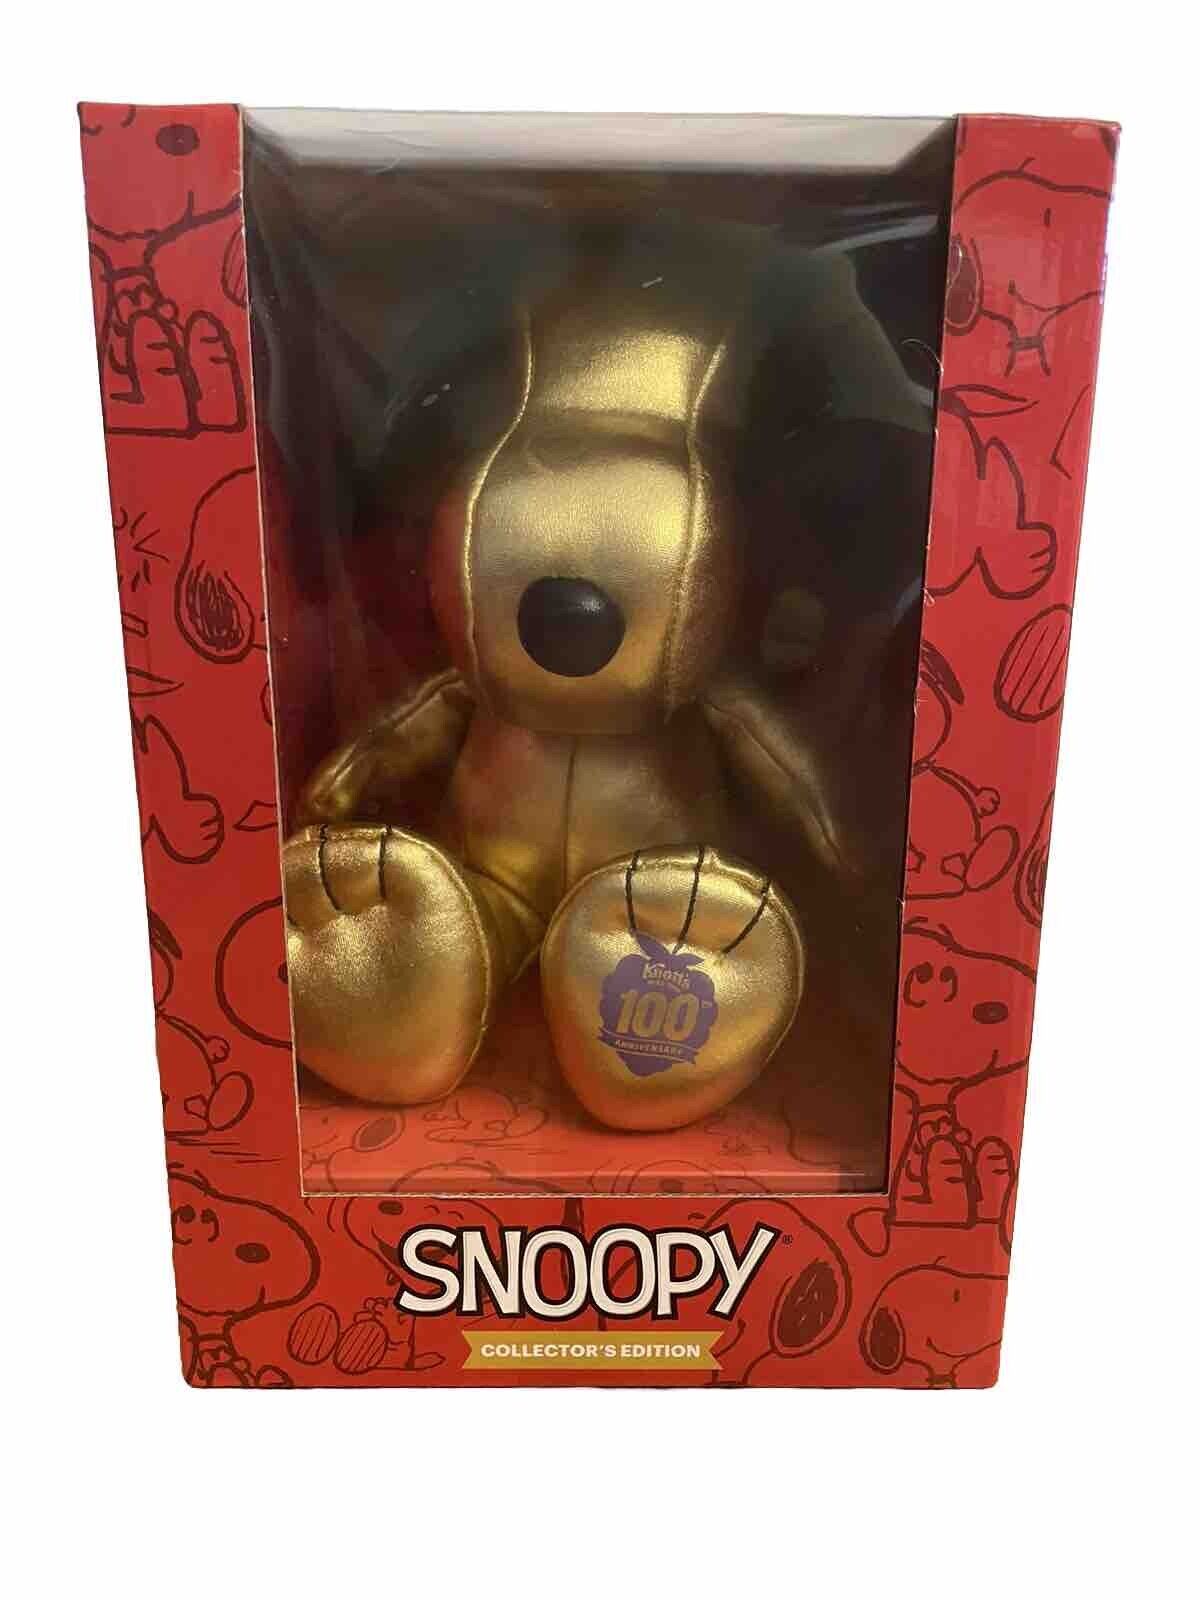 Knotts Berry Farm Gold Snoopy Plushie Never Opened